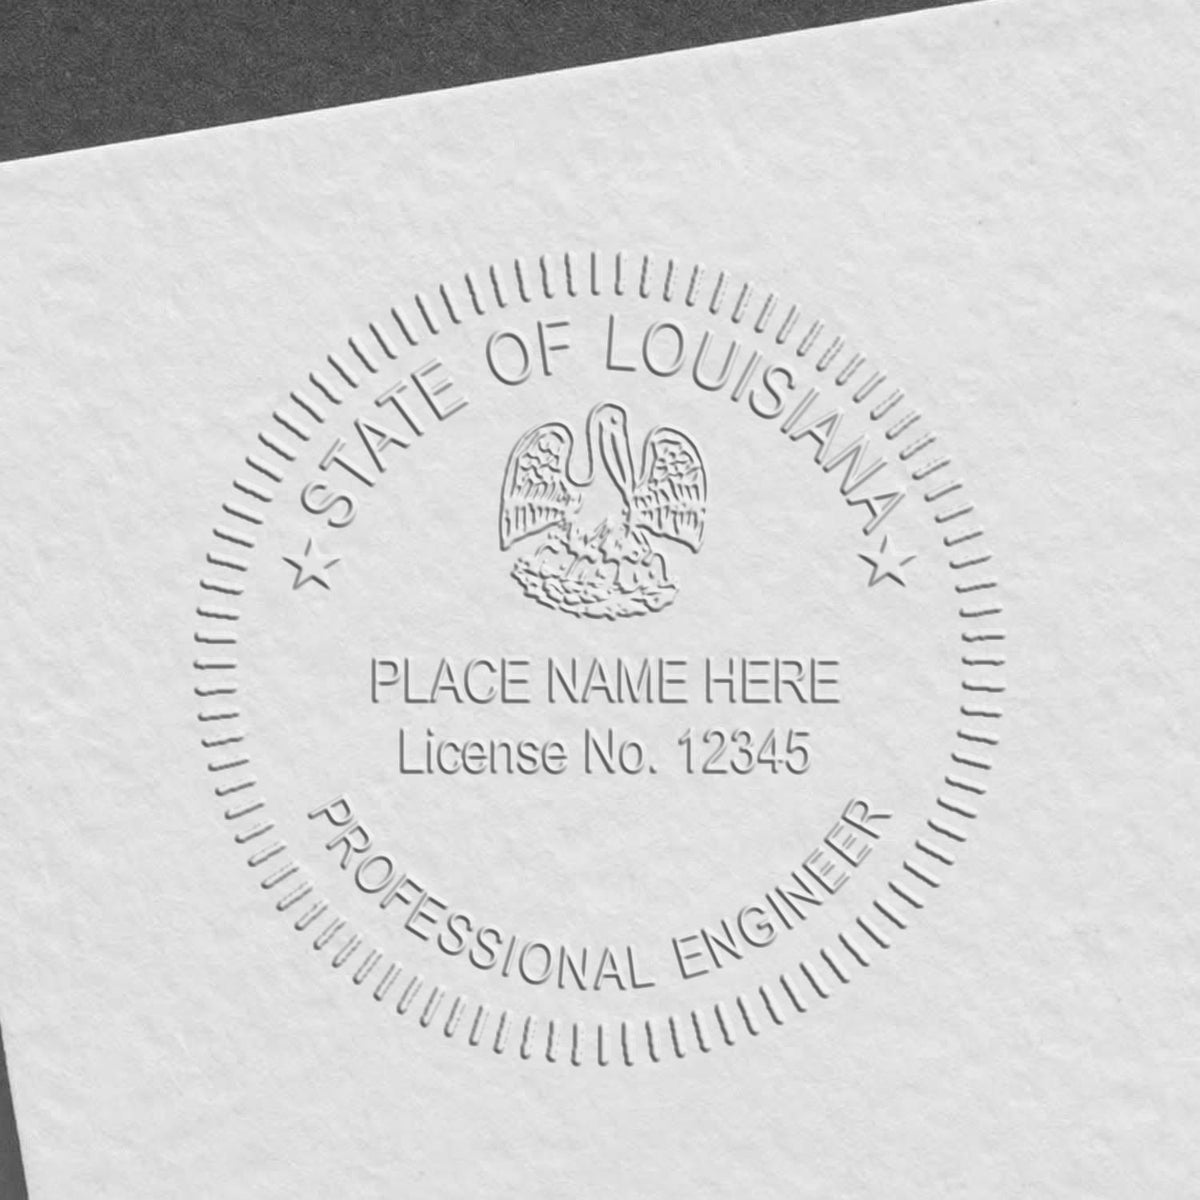 A photograph of the Long Reach Louisiana PE Seal stamp impression reveals a vivid, professional image of the on paper.